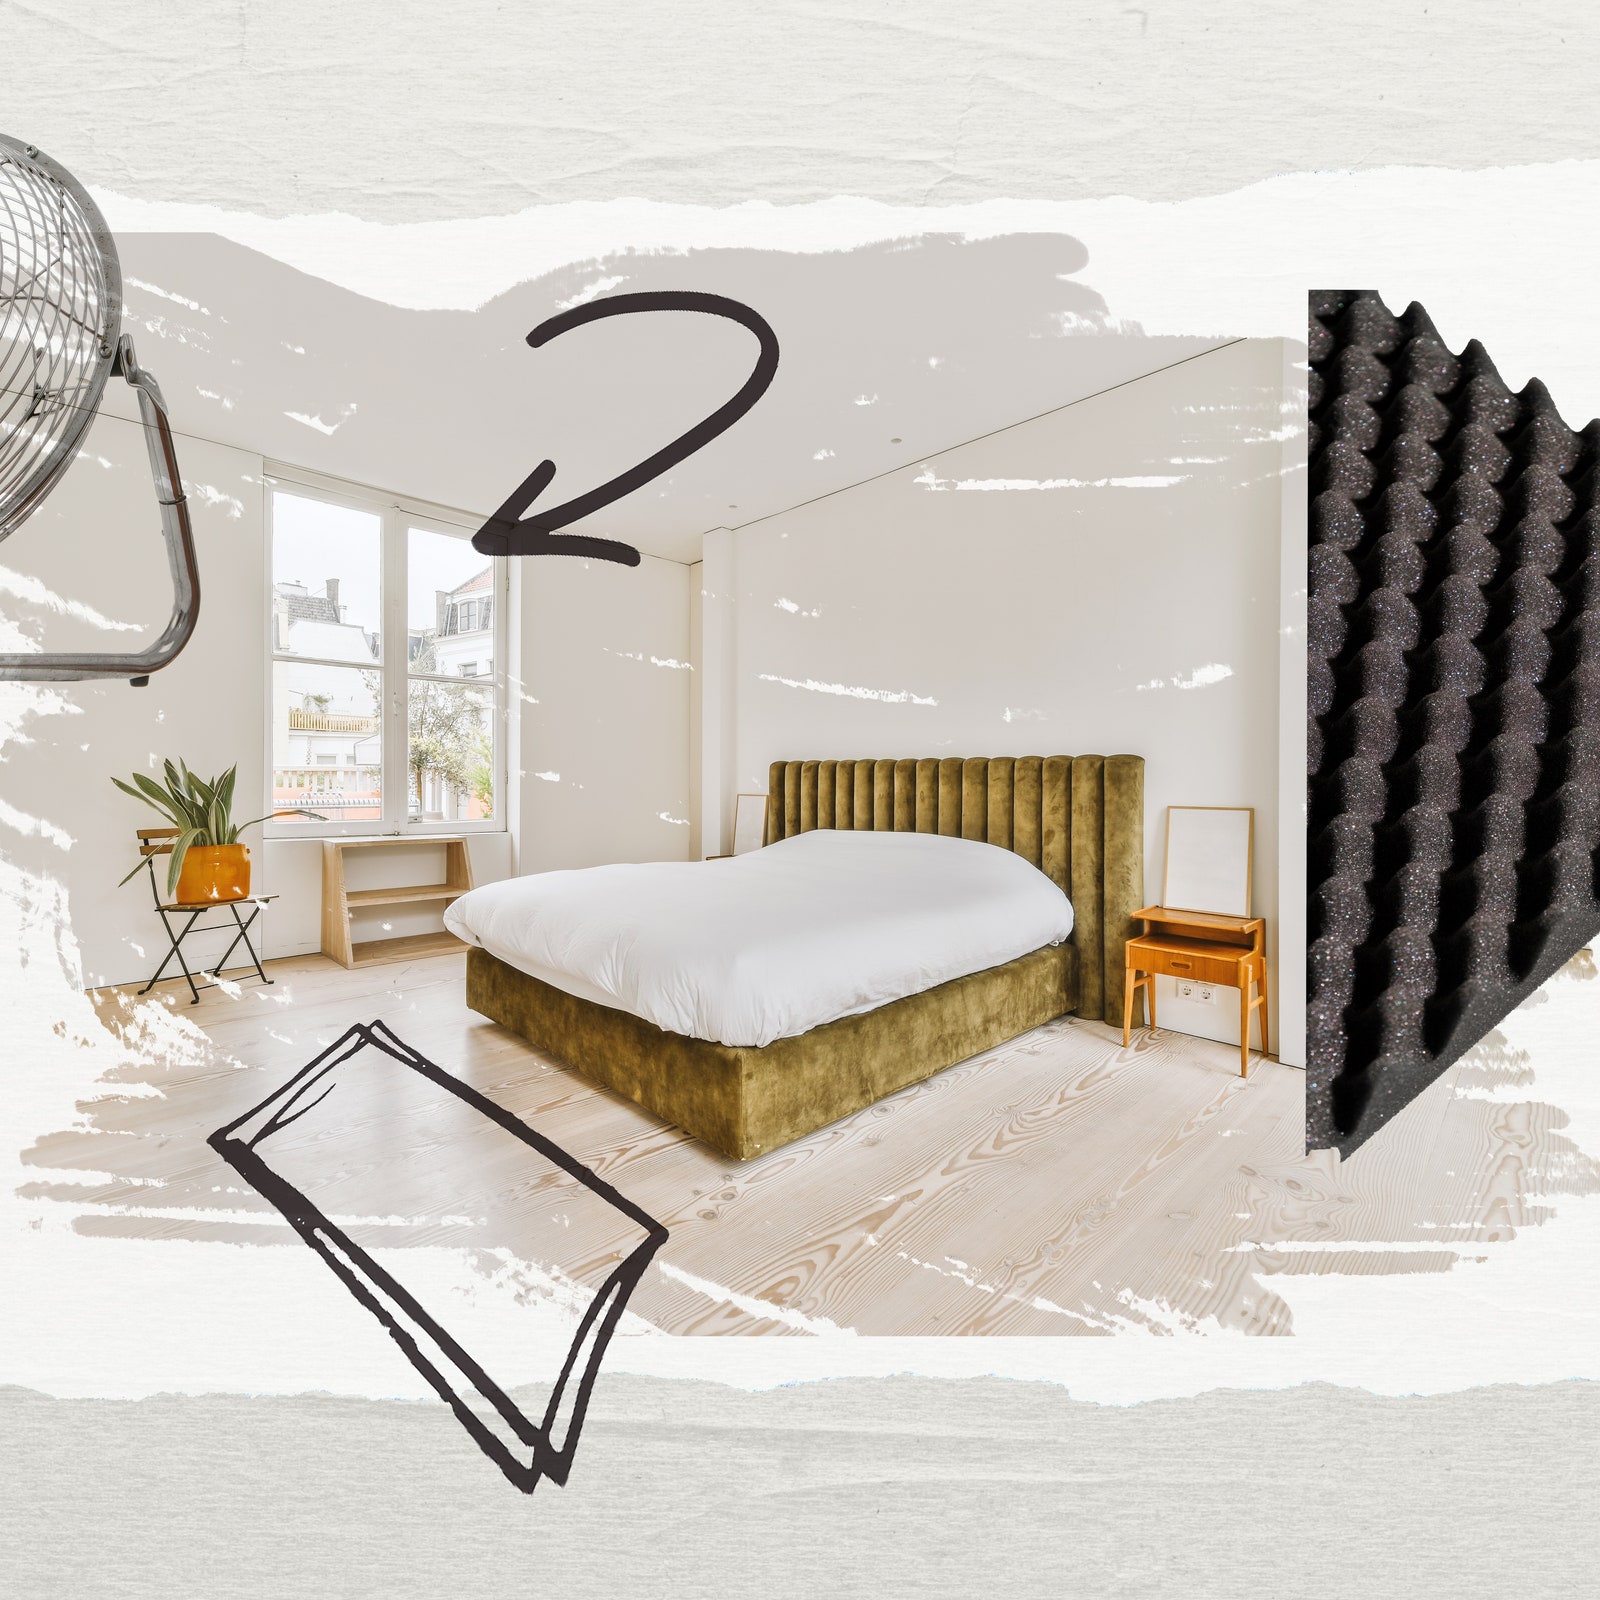 7 Ways to Soundproof a Room (So You Can Actually Get Some Rest)